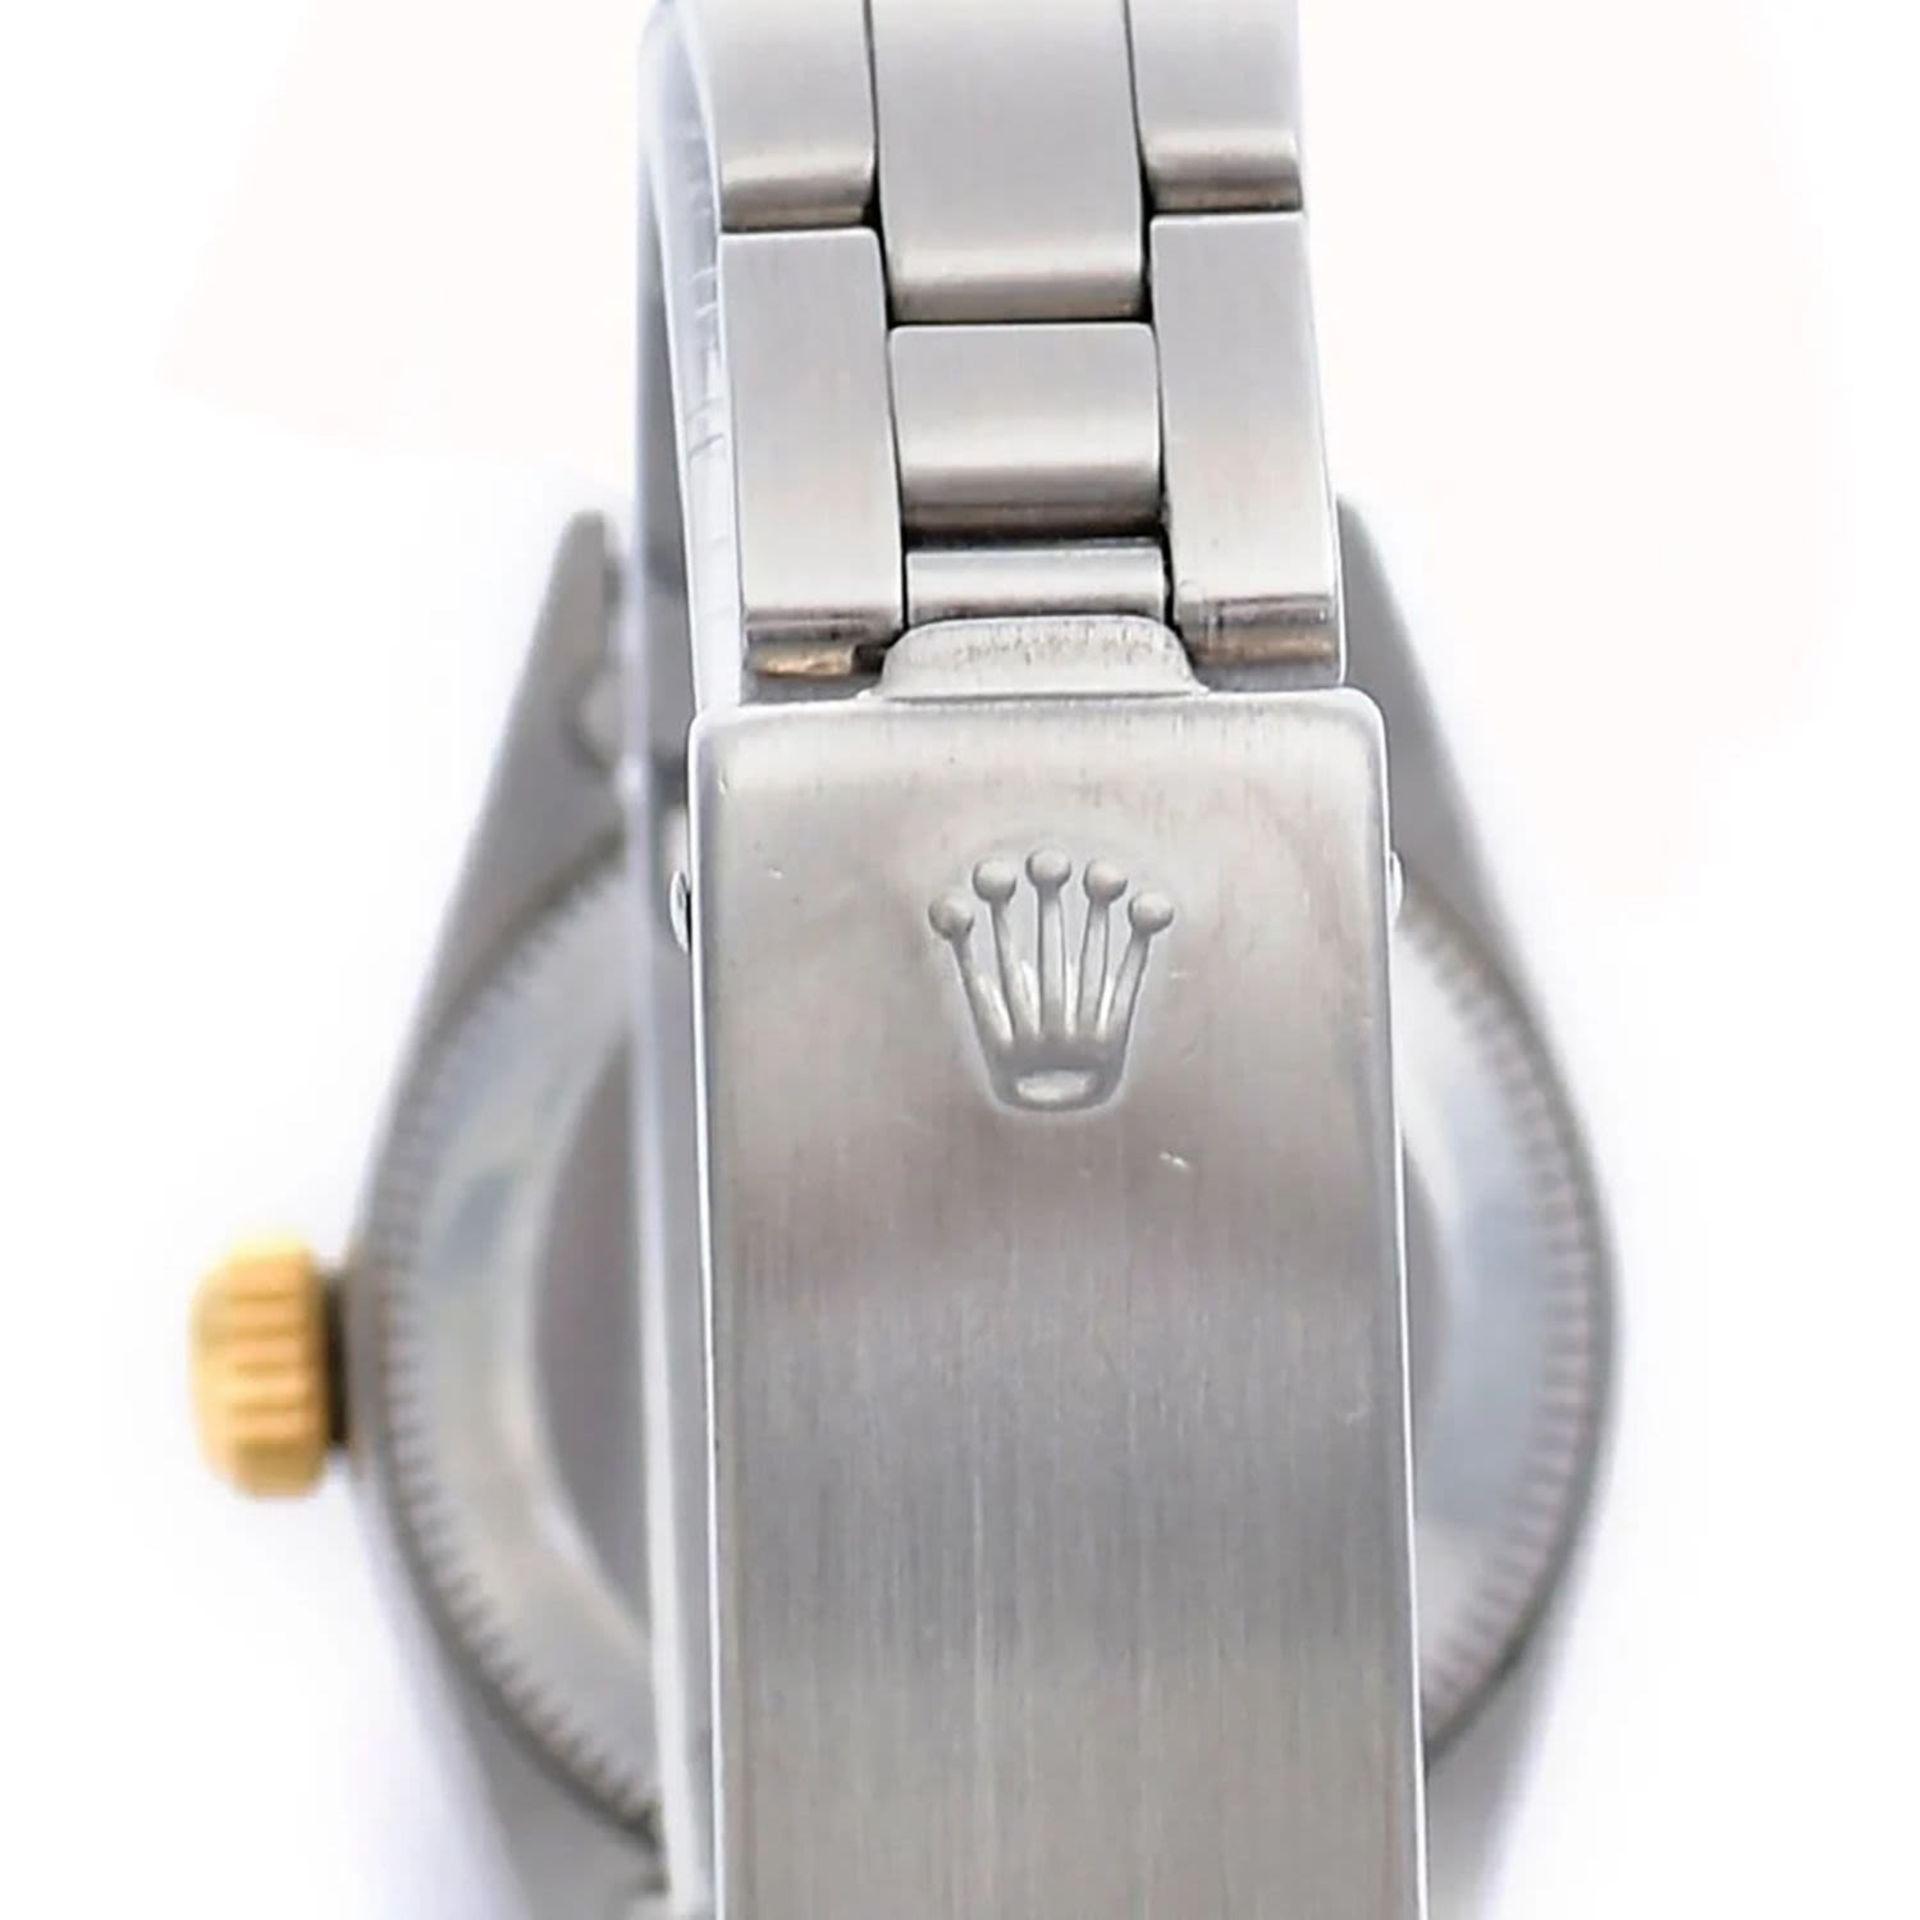 Rolex Oyster Perpetual 6509 vintage steel and gold wristwatch - Image 2 of 6